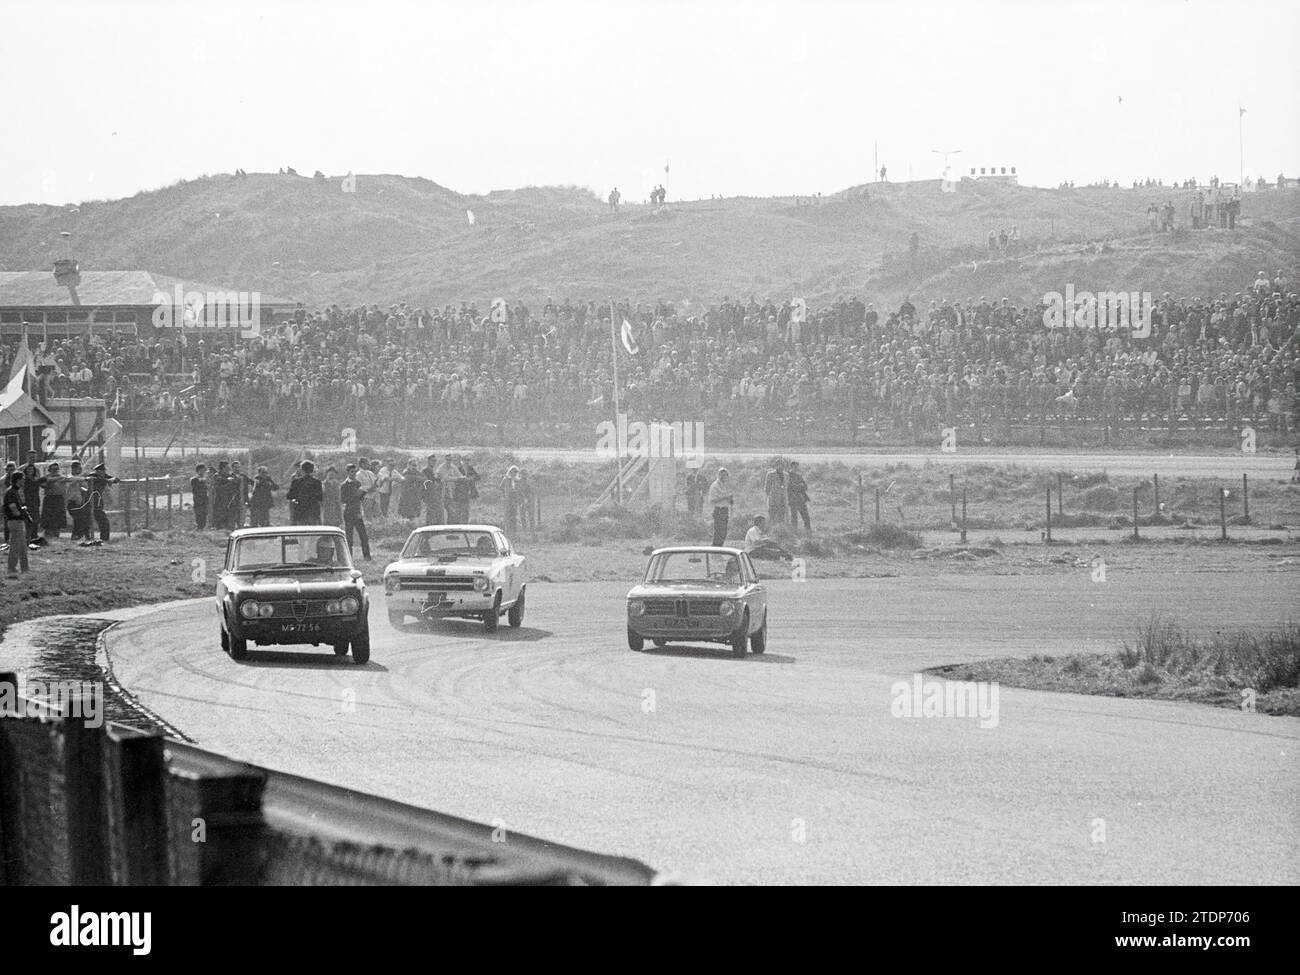 Car racing Circuit Zandvoort, Zandvoort, Whizgle News from the Past, Tailored for the Future. Explore historical narratives, Dutch The Netherlands agency image with a modern perspective, bridging the gap between yesterday's events and tomorrow's insights. A timeless journey shaping the stories that shape our future Stock Photo